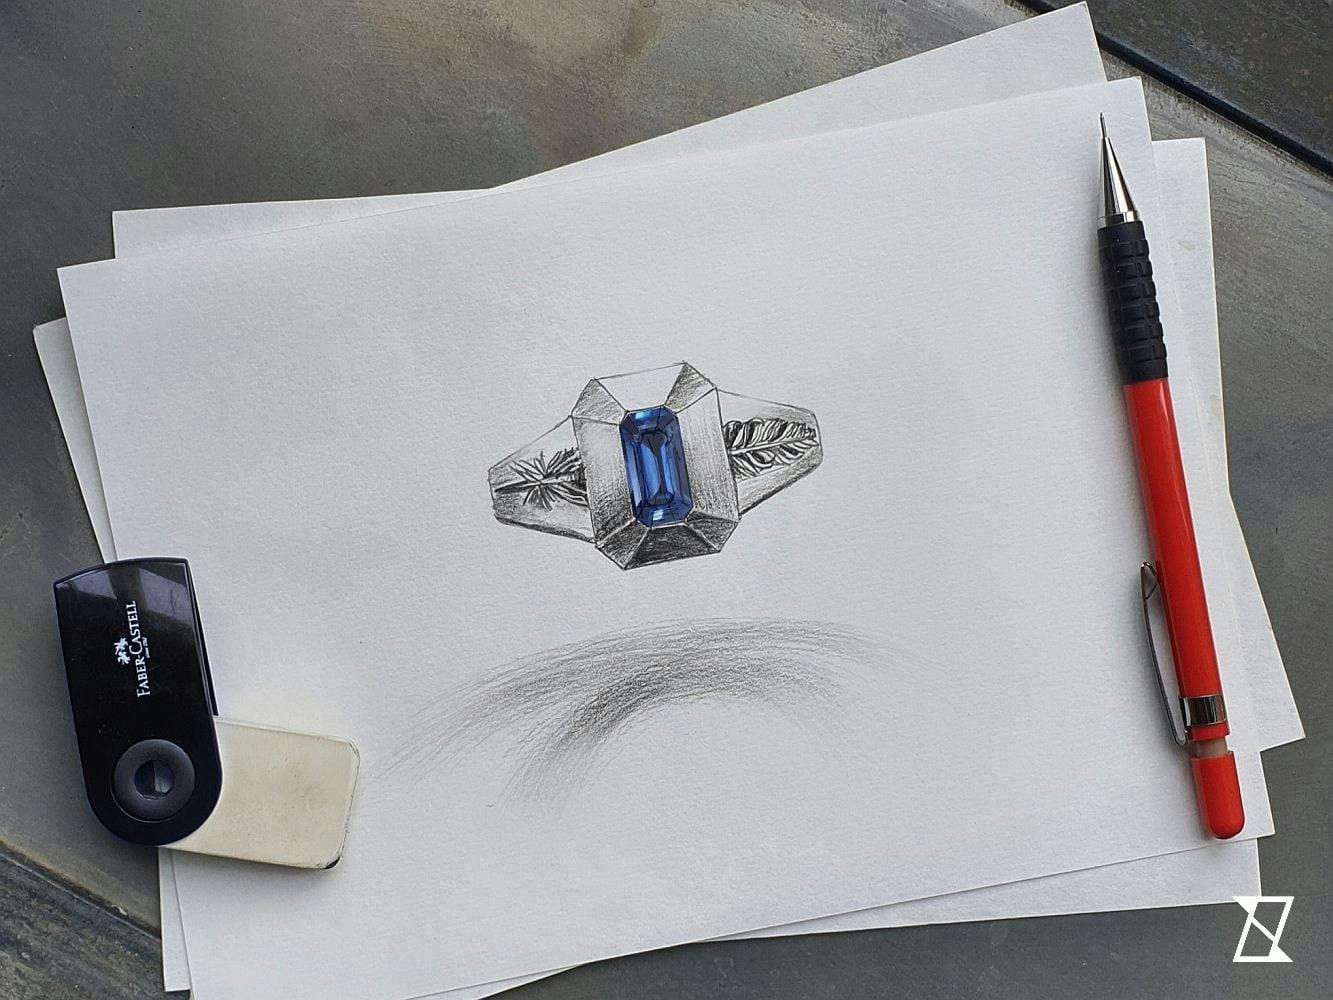 Second concept sketch showing the top of the custom signet ring with emerald cut sapphire.